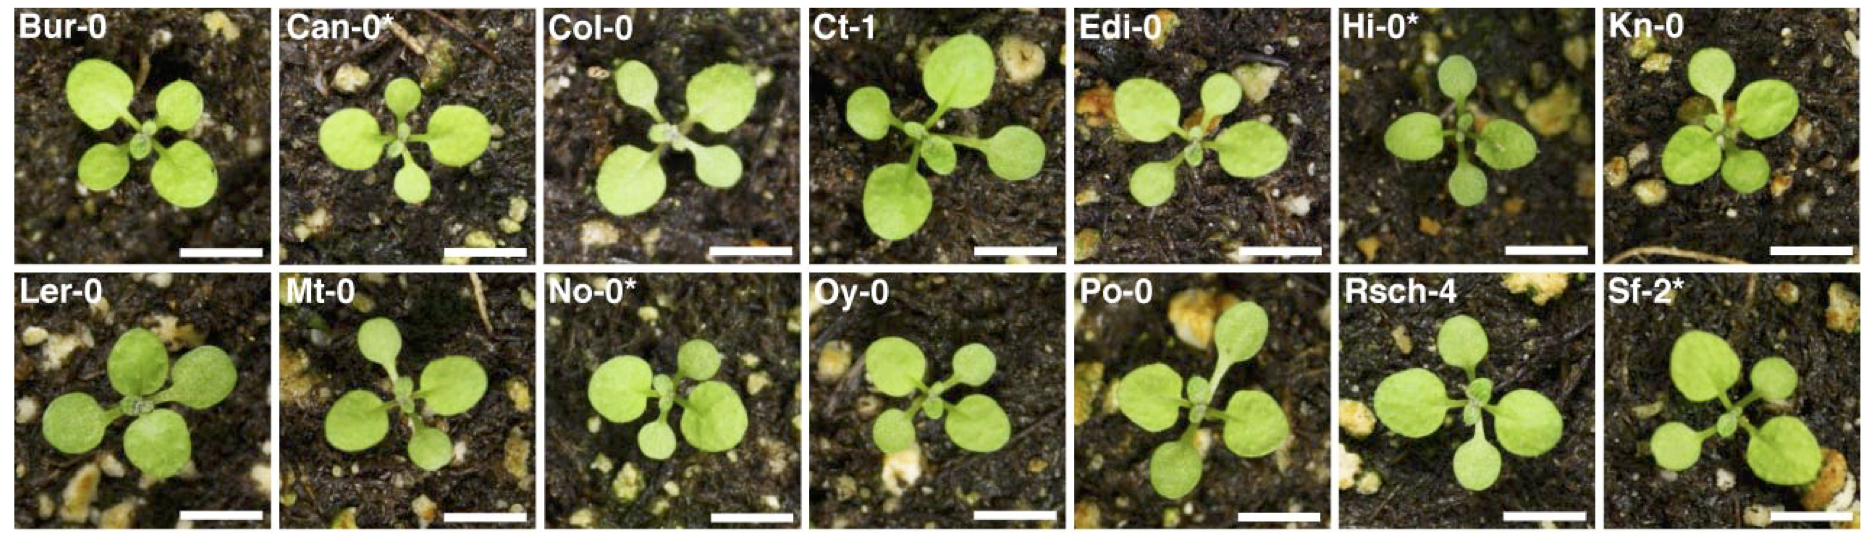 Arabidopsis Accessions